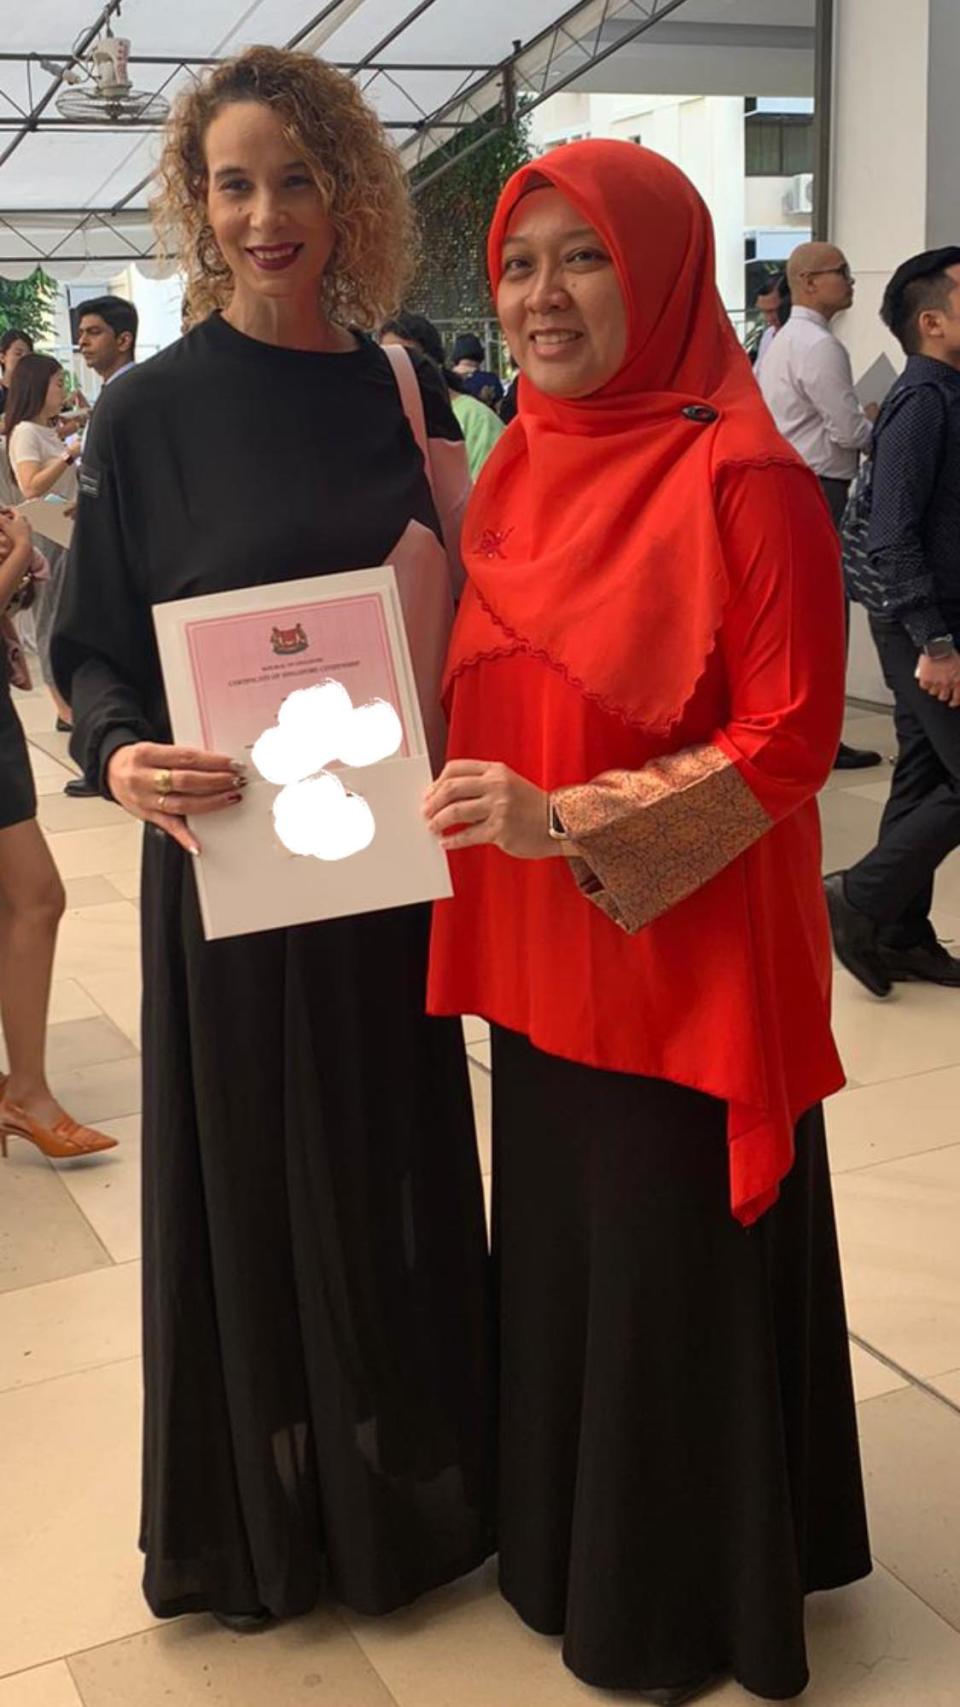 Wendy Jacobs, formerly South African wife of Singaporean football star Fandi Ahmad, received her certificate of citizenship from MP Intan Azura Mokhtar on 12 January 2020. (PHOTO: Intan Mokhtar/Facebook)